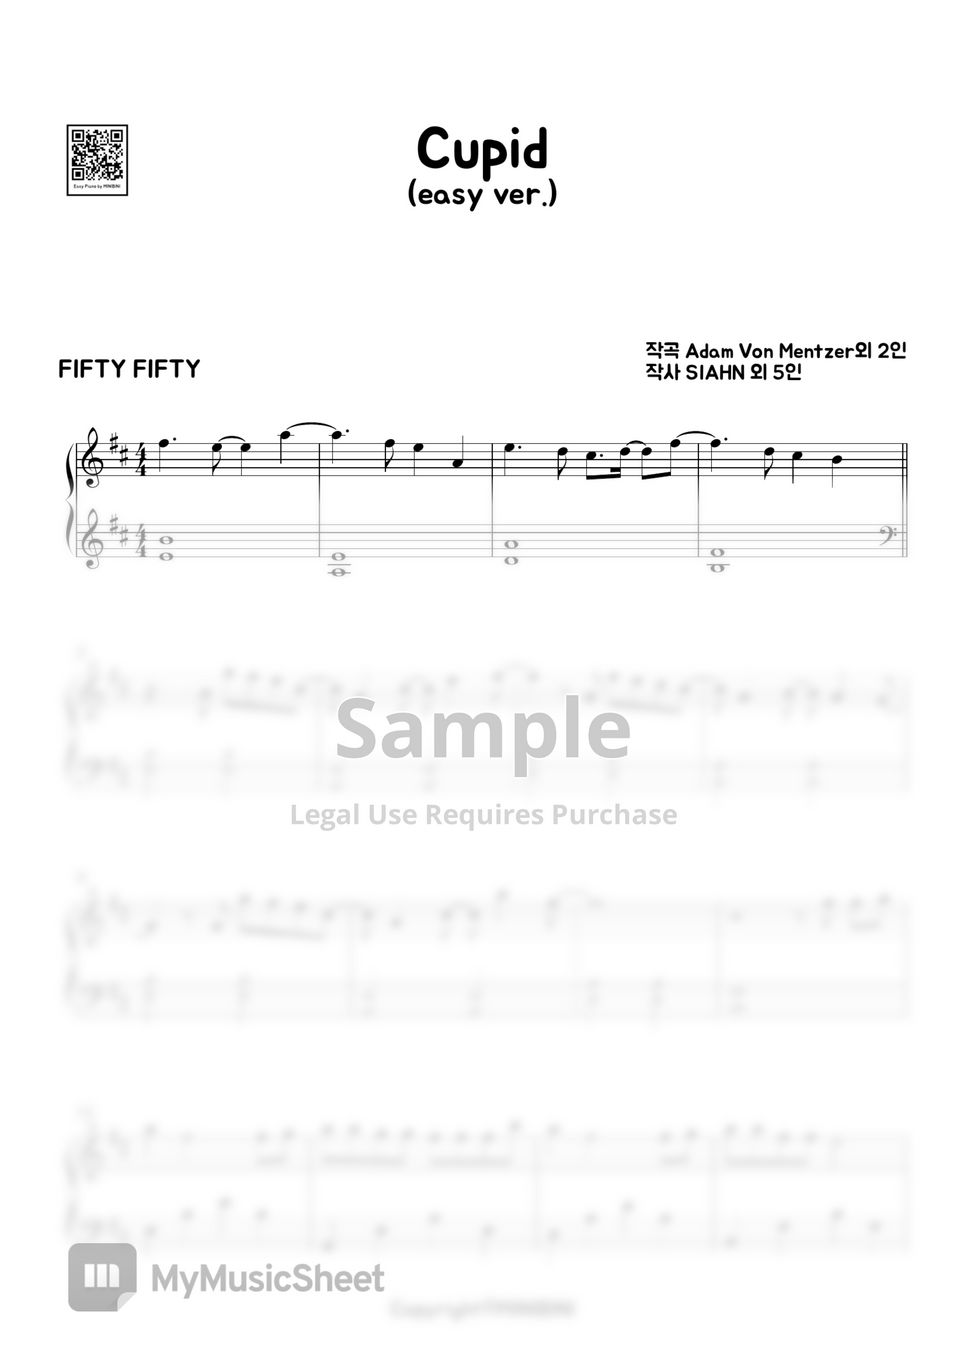 Fifty Fifty - Cupid (Easy Version) Partitura by MINIBINI